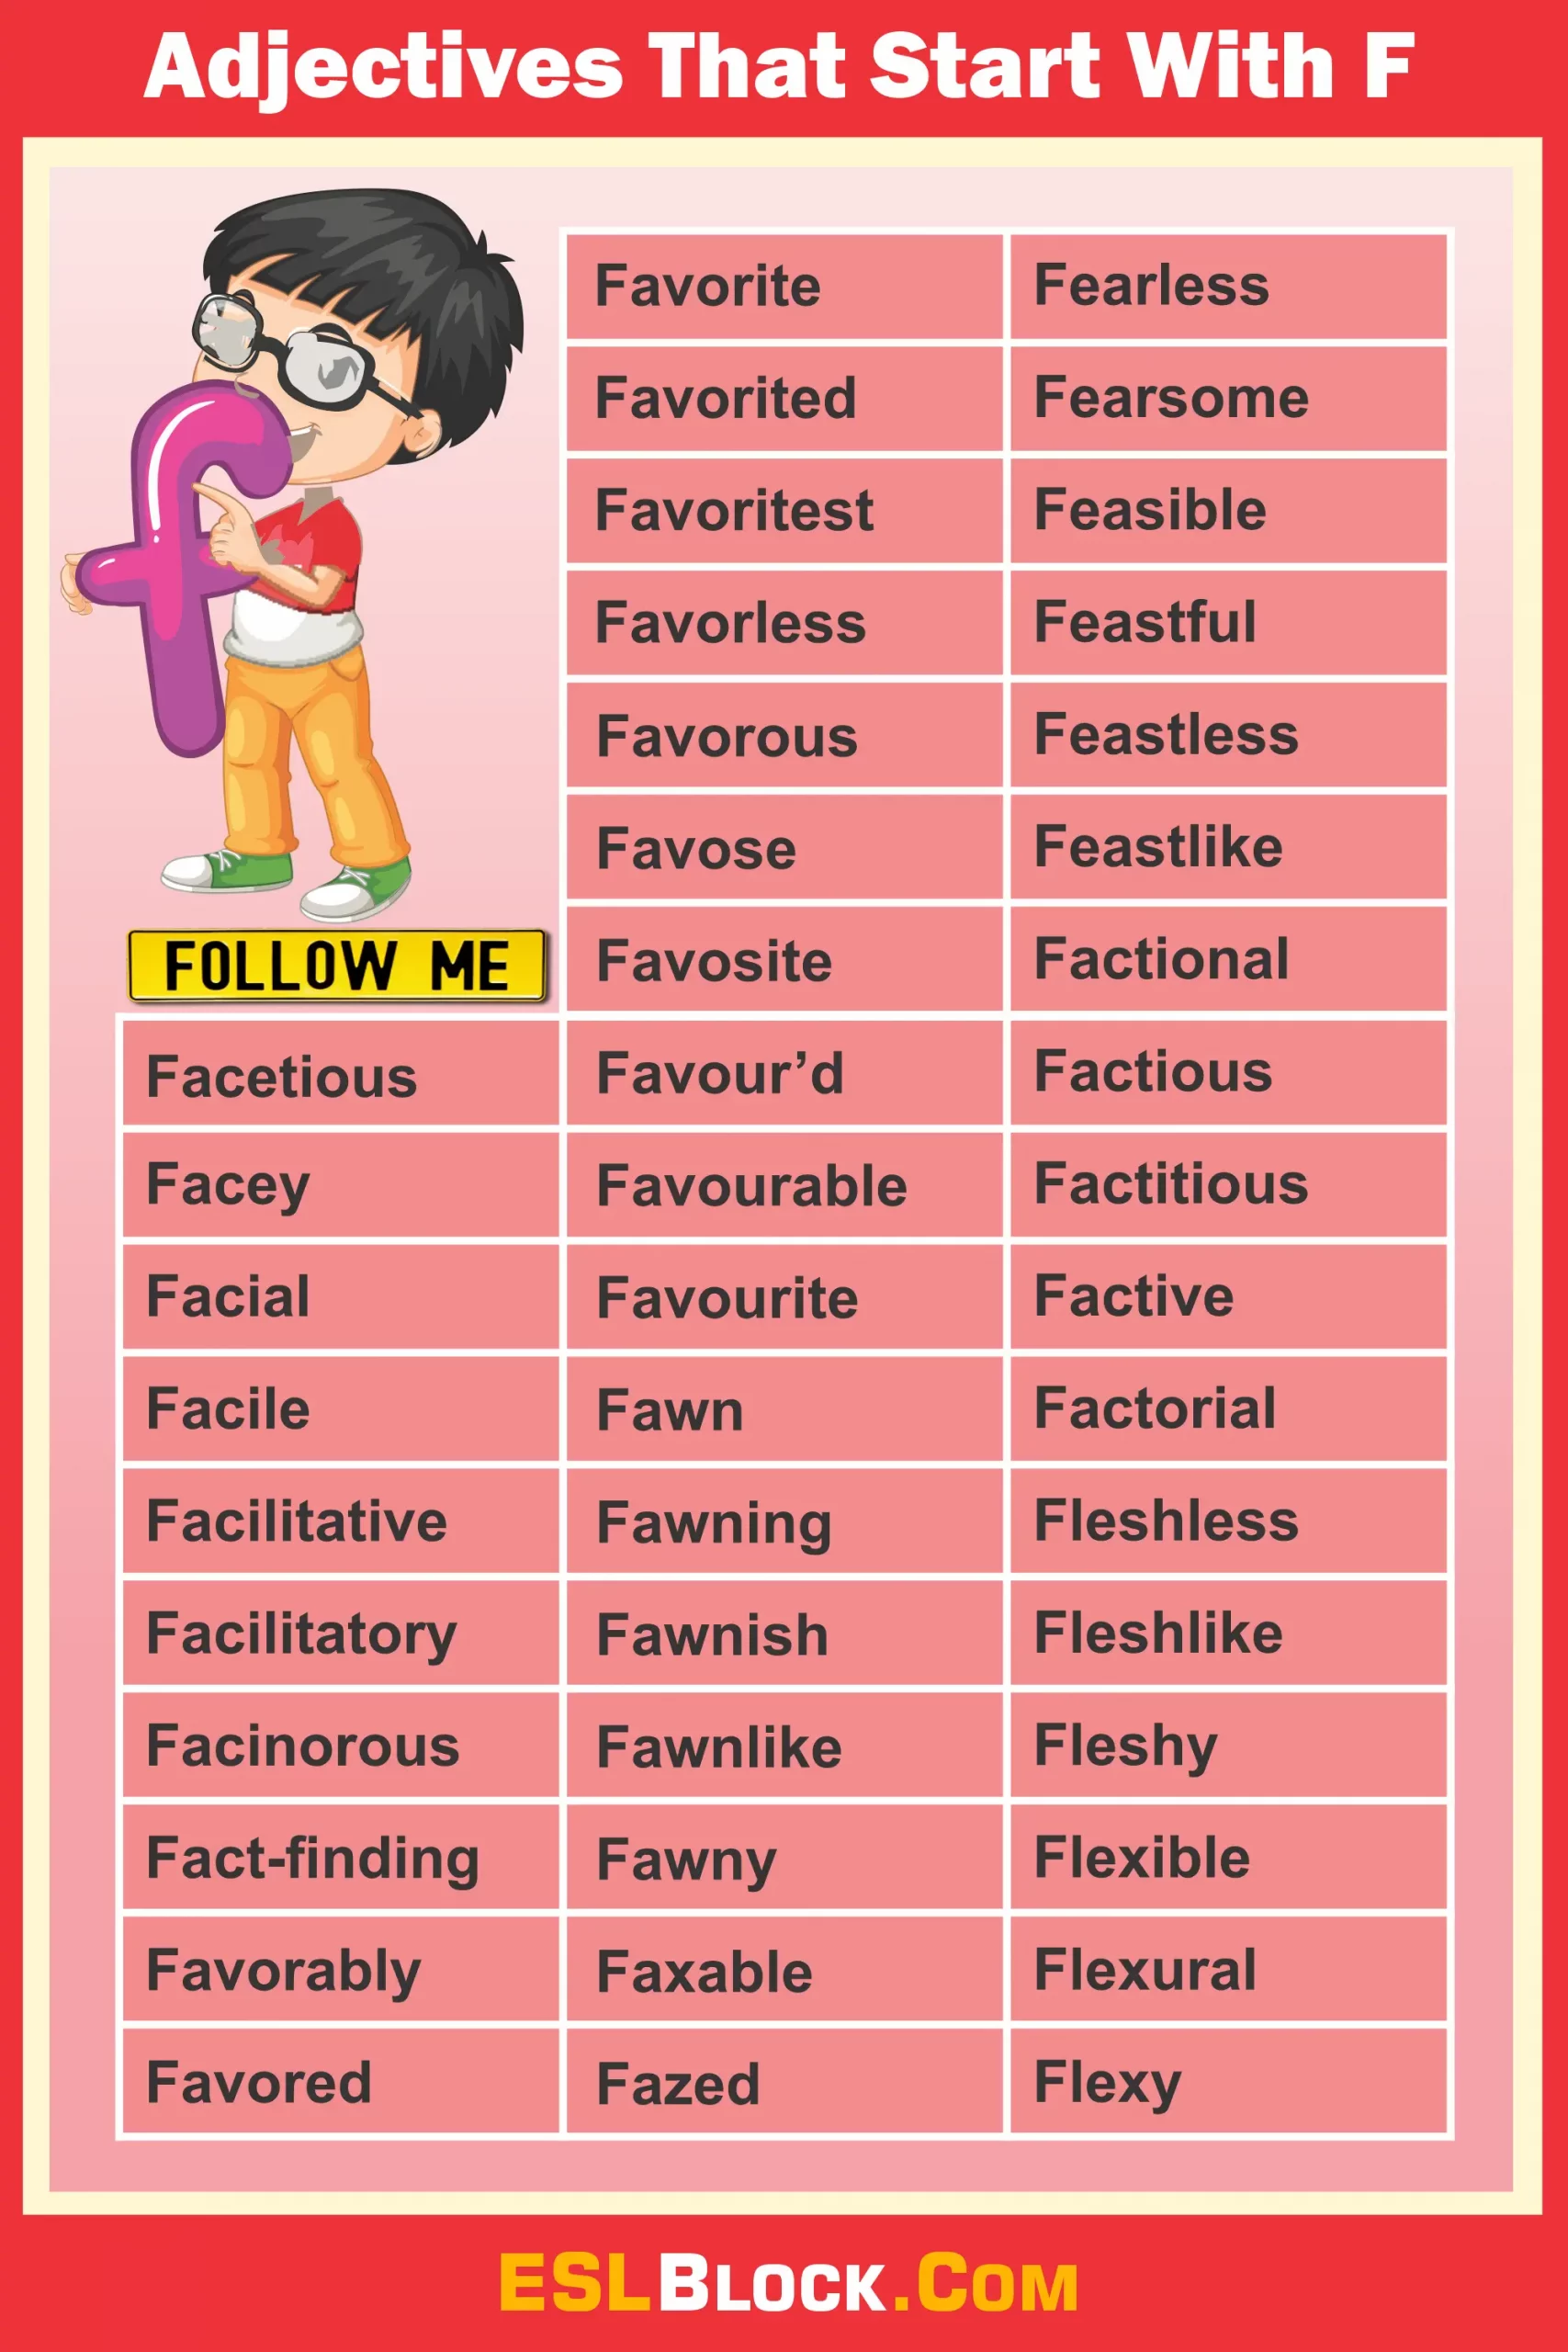 A-Z Adjectives, Adjective Words, Adjectives, F Words, Vocabulary, Words That Describe a Person, Adjectives that start with F